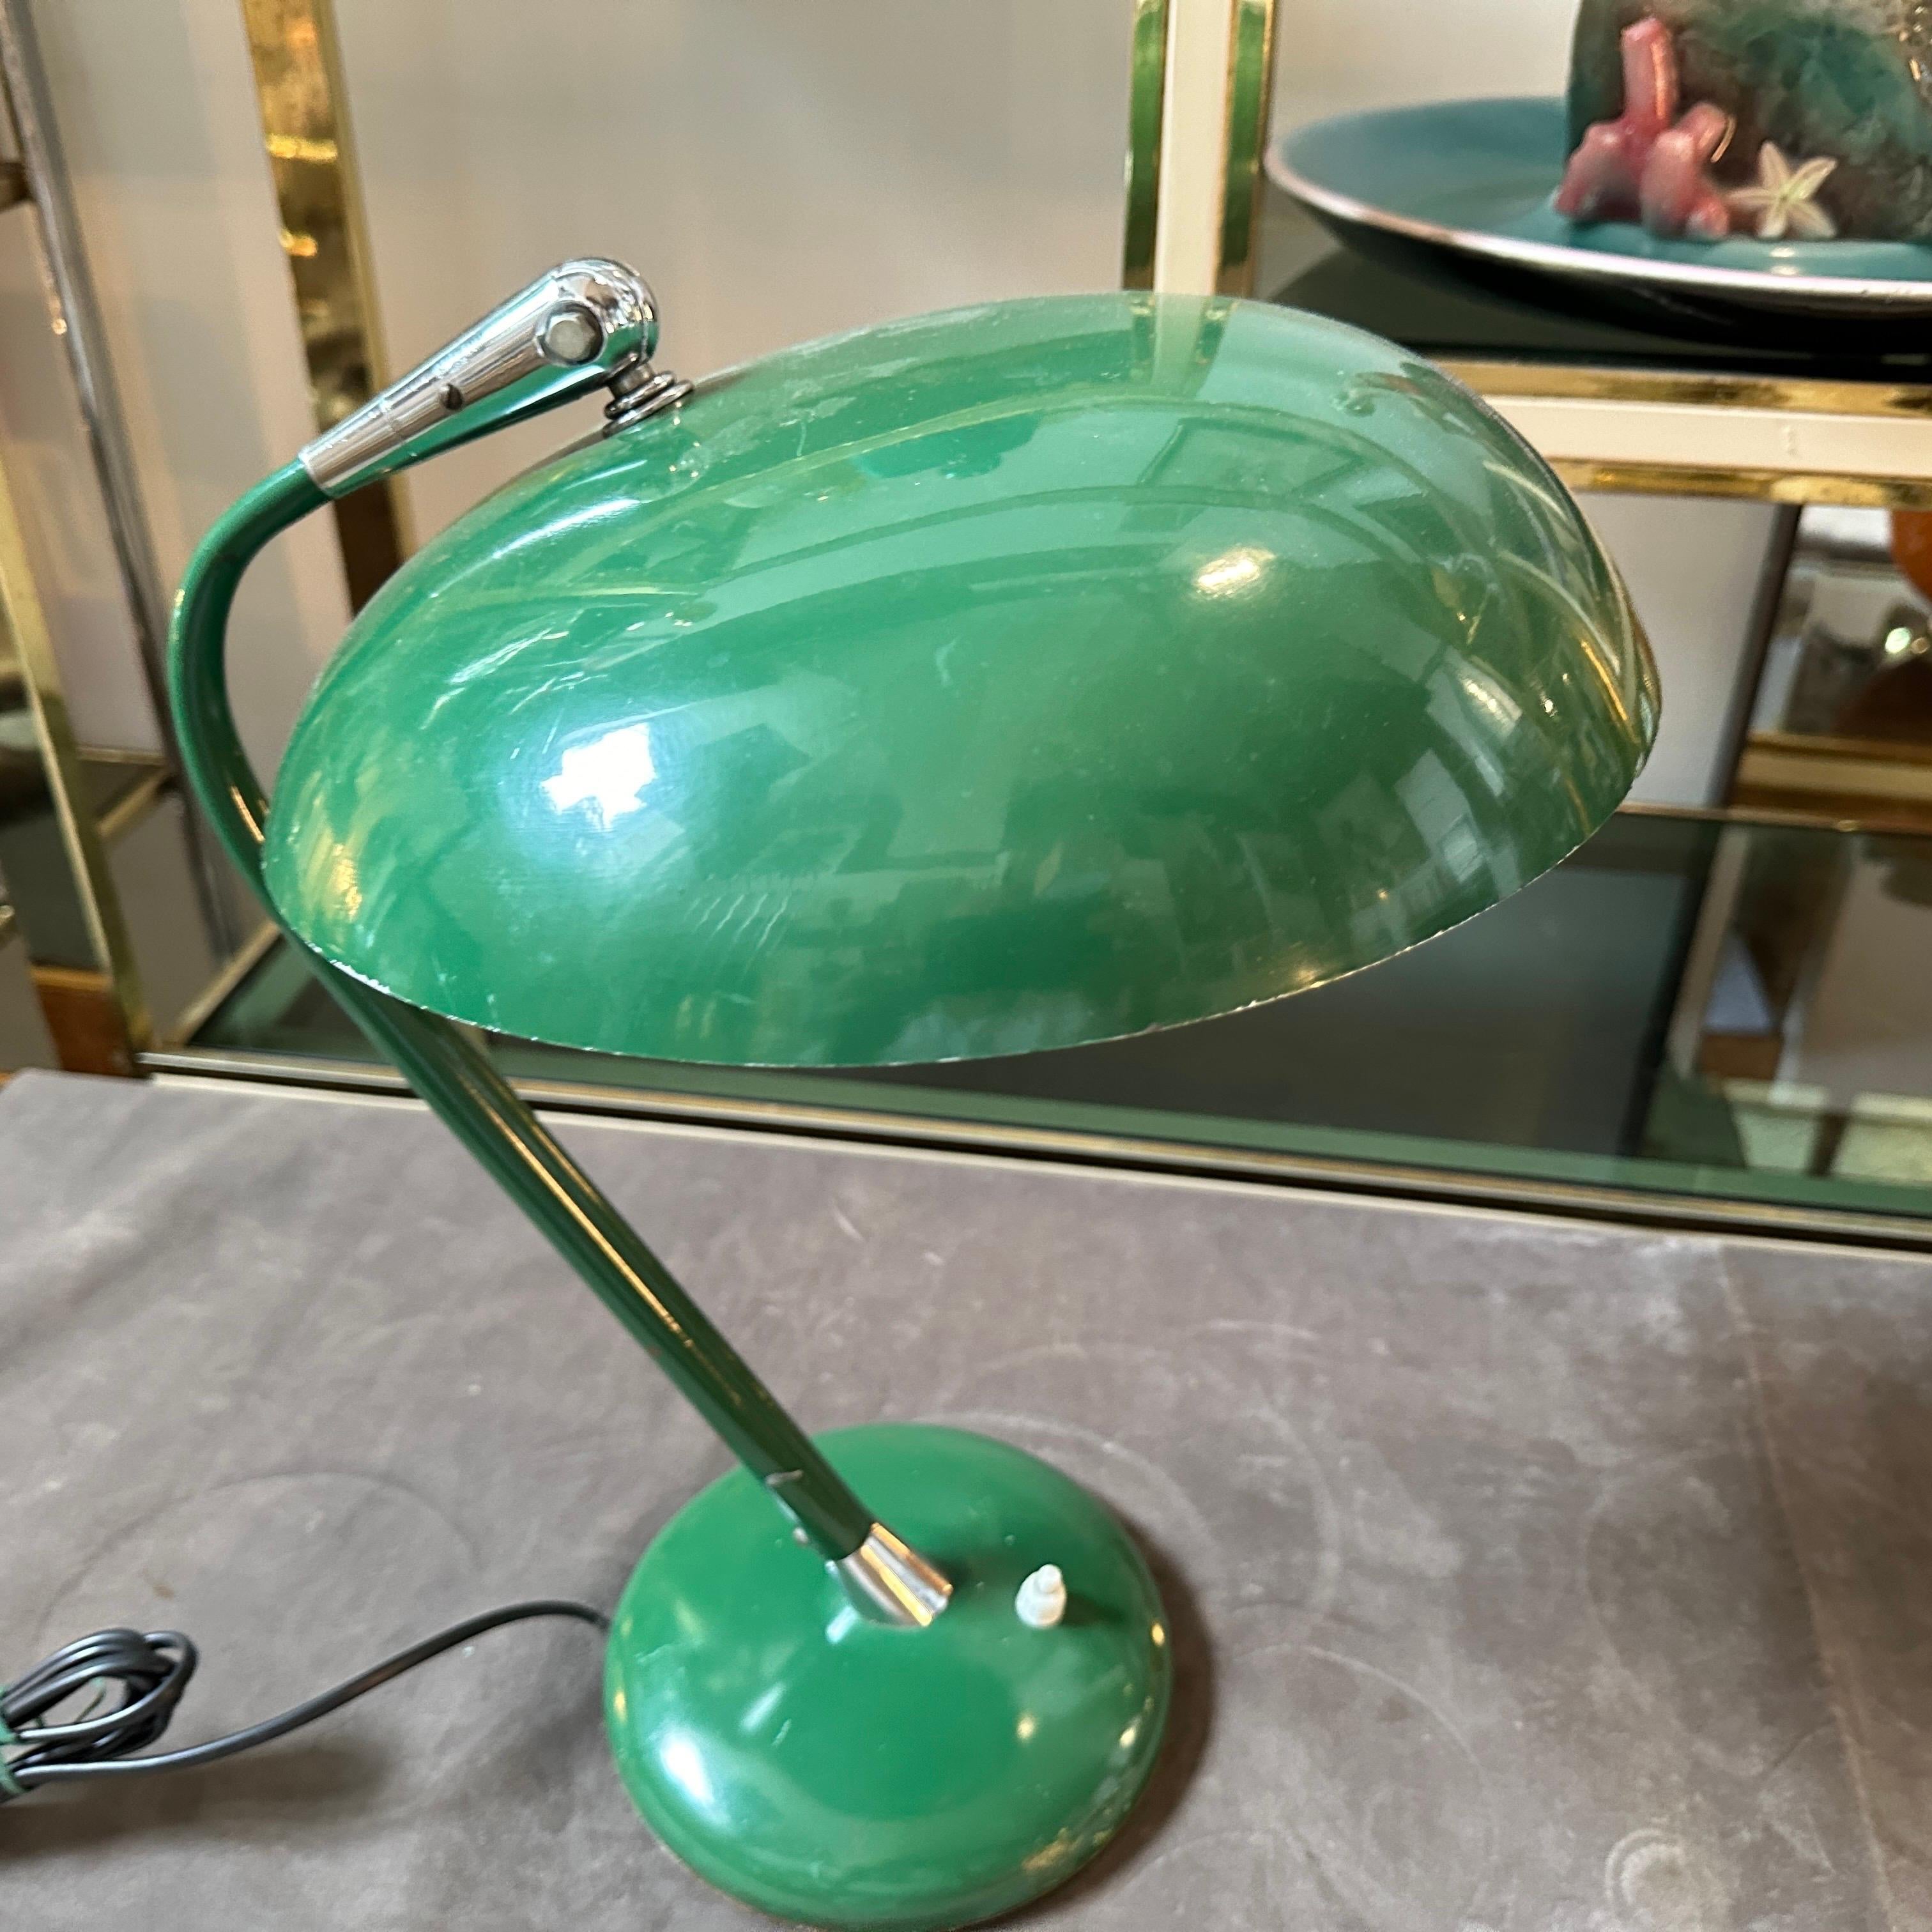 A desk lamp designed and manufactured in Italy in the Sixties in the manner of Stilnovo. Lamp is in good condition overall an ithas been rewired. The design prioritizes both form and function, with a focus on clean lines, geometric shapes, and a